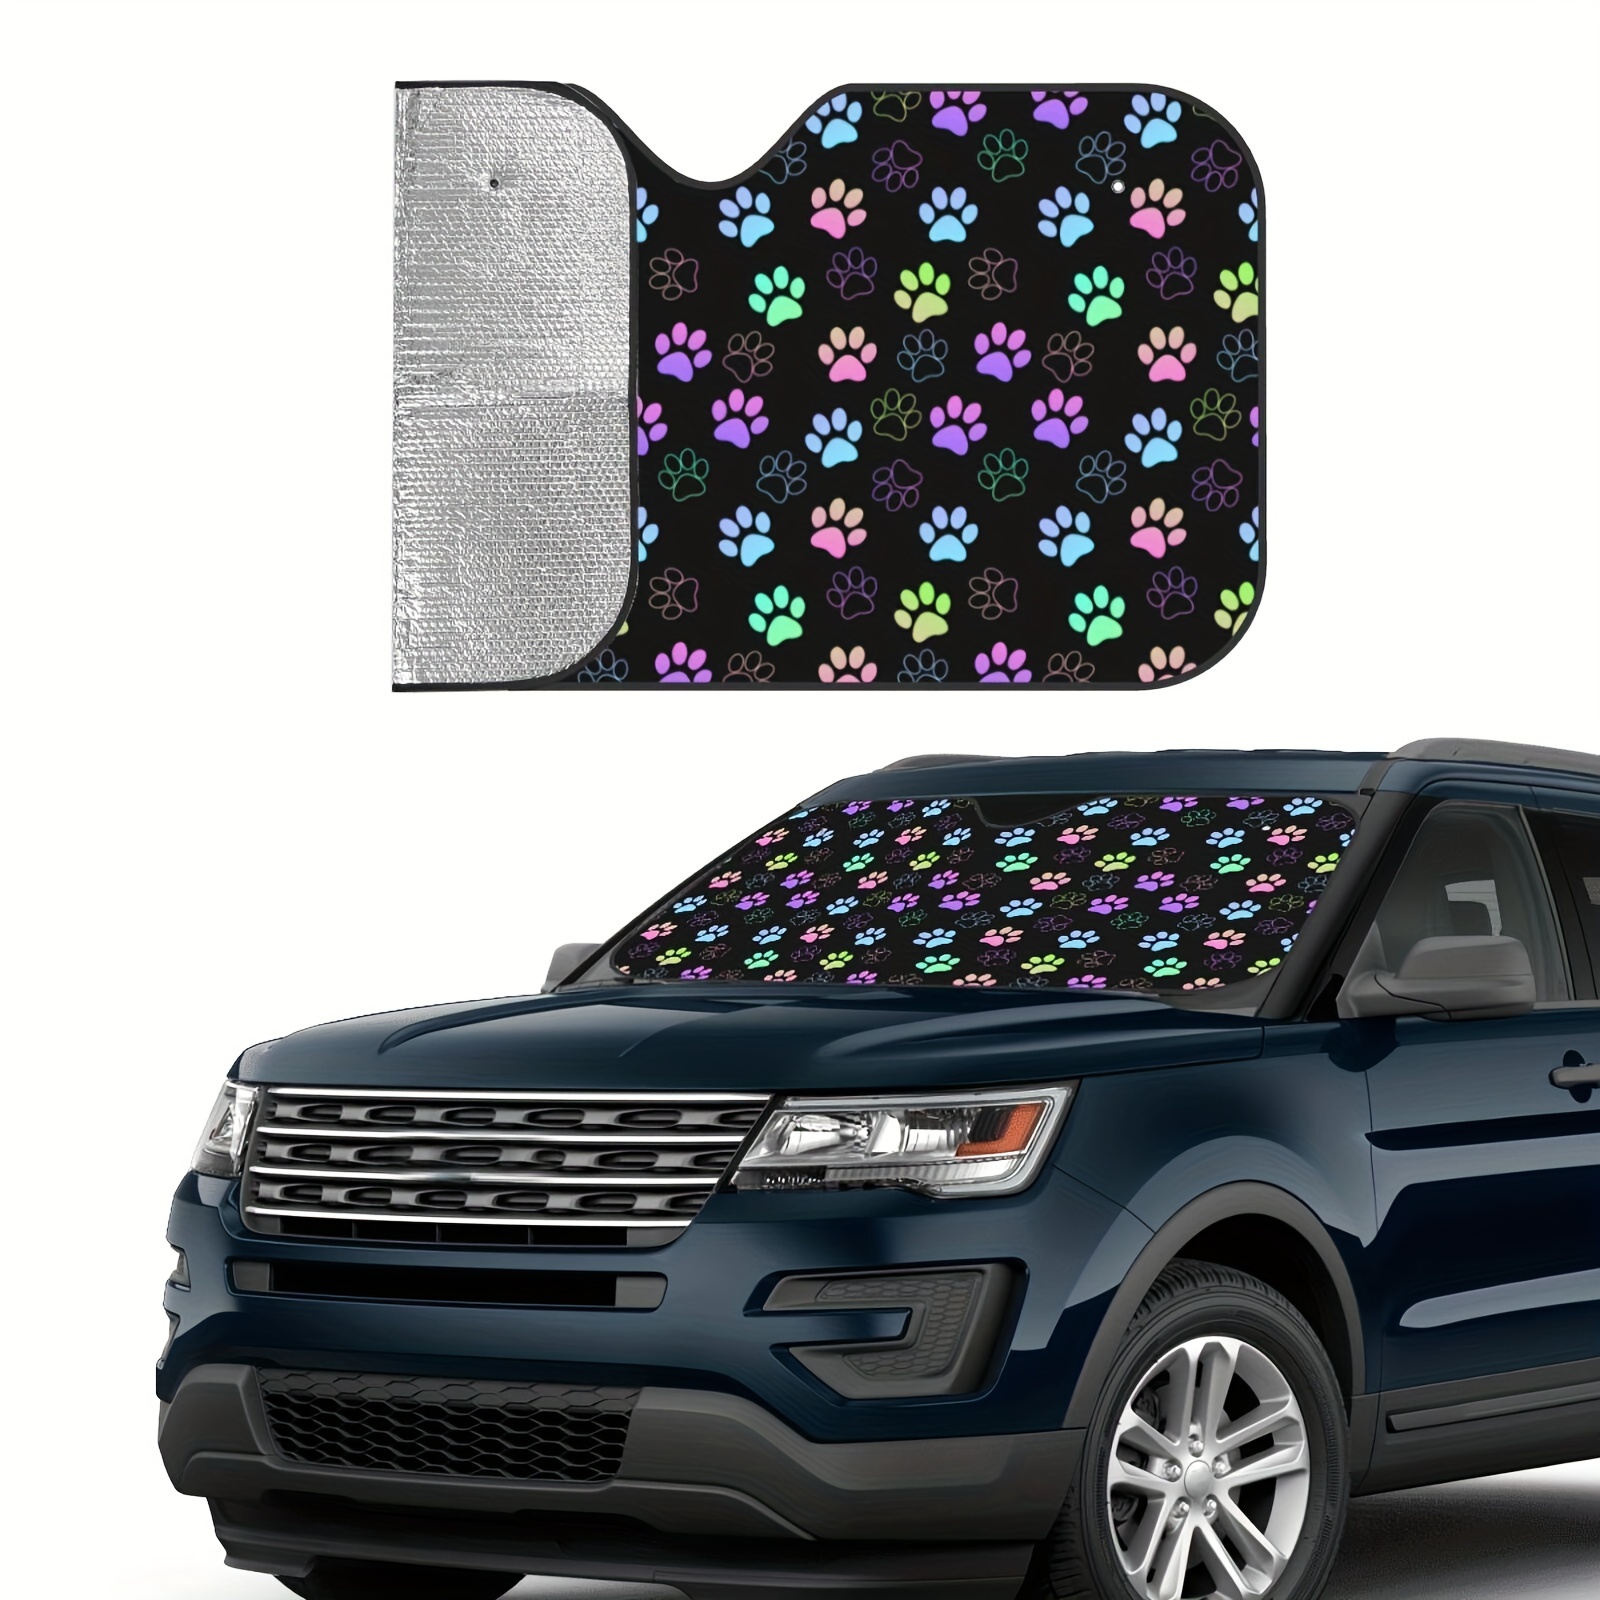 Car Windshield Front Sunshade Cute Colorful Paw Print Aluminum Film Sun  Visor Sunscreen Foldable For Car Accessories 27.5x51in